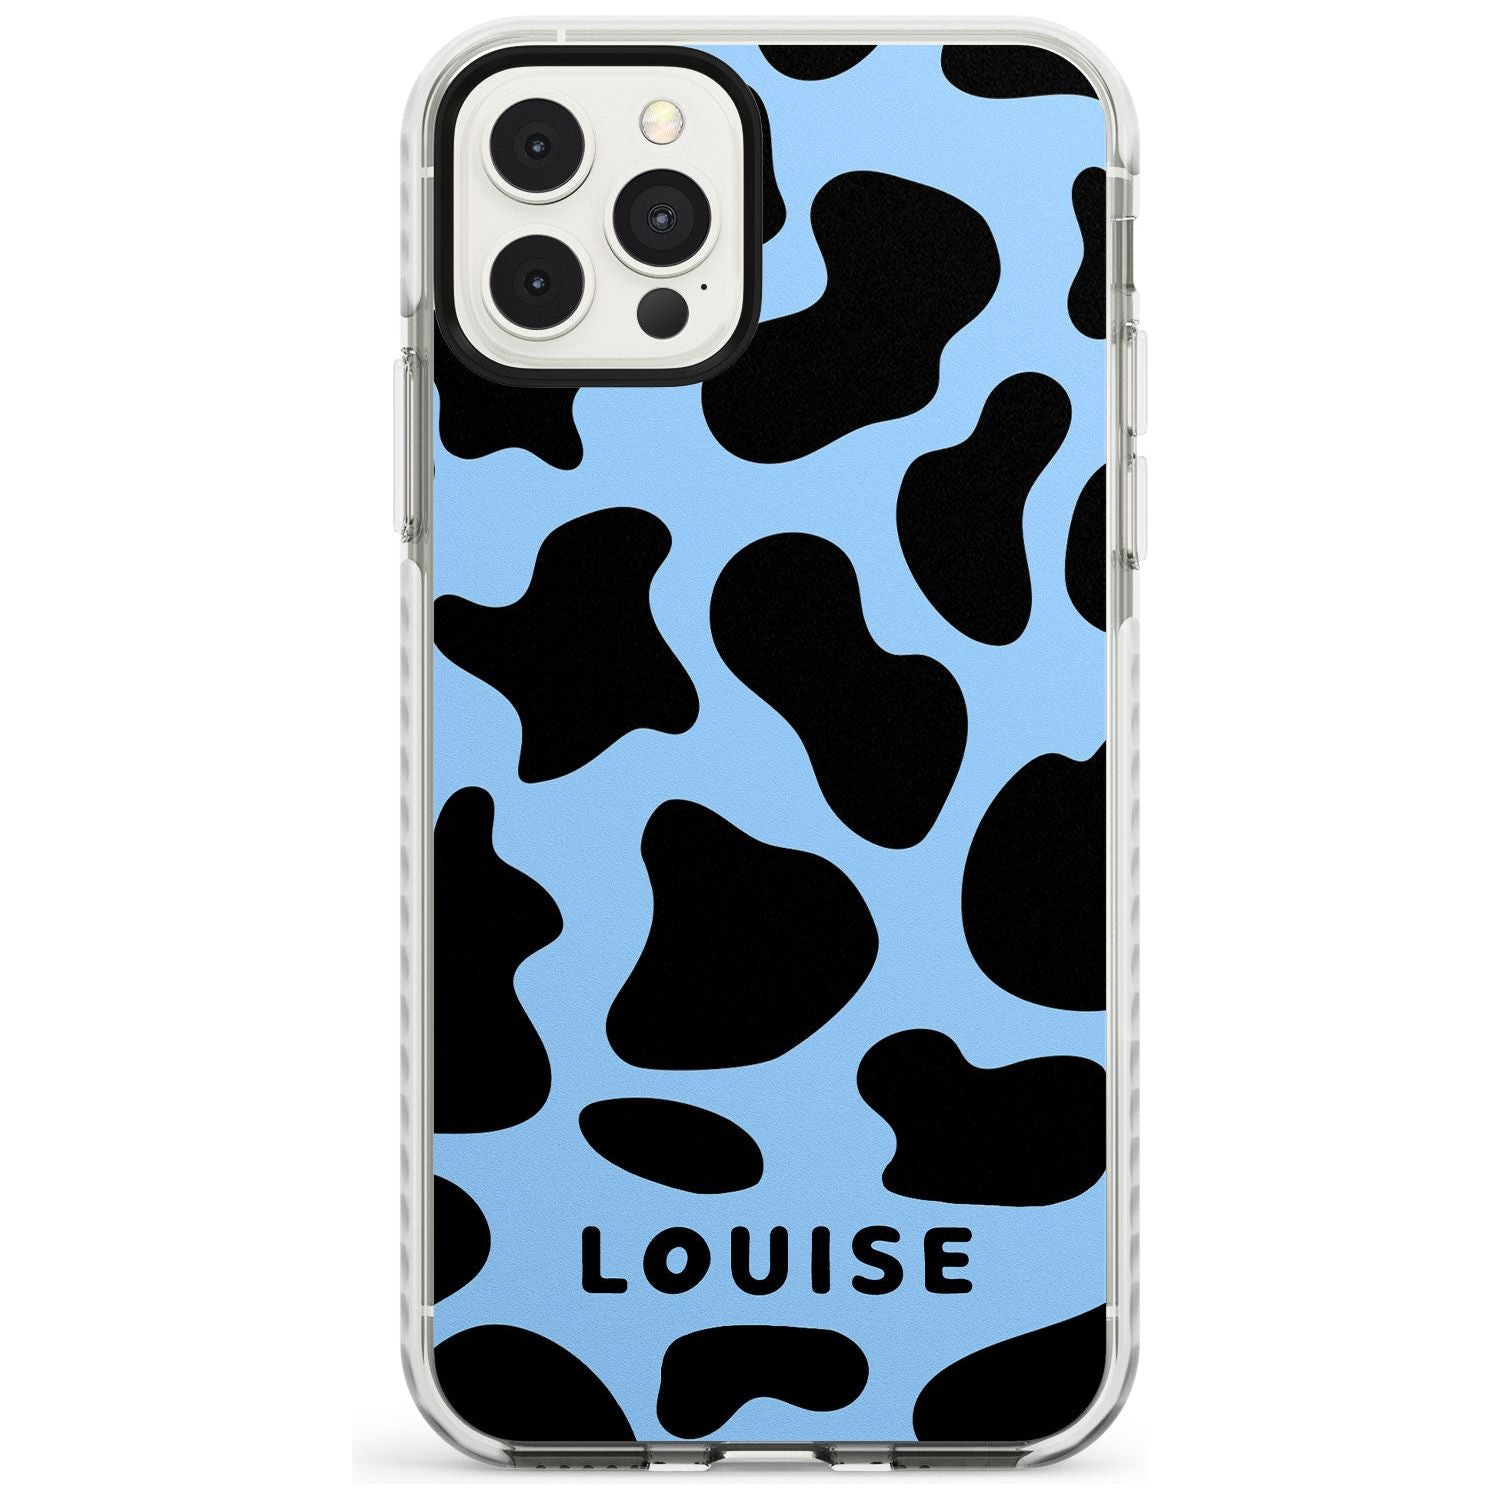 Personalised Blue and Black Cow Print Impact Phone Case for iPhone 11 Pro Max